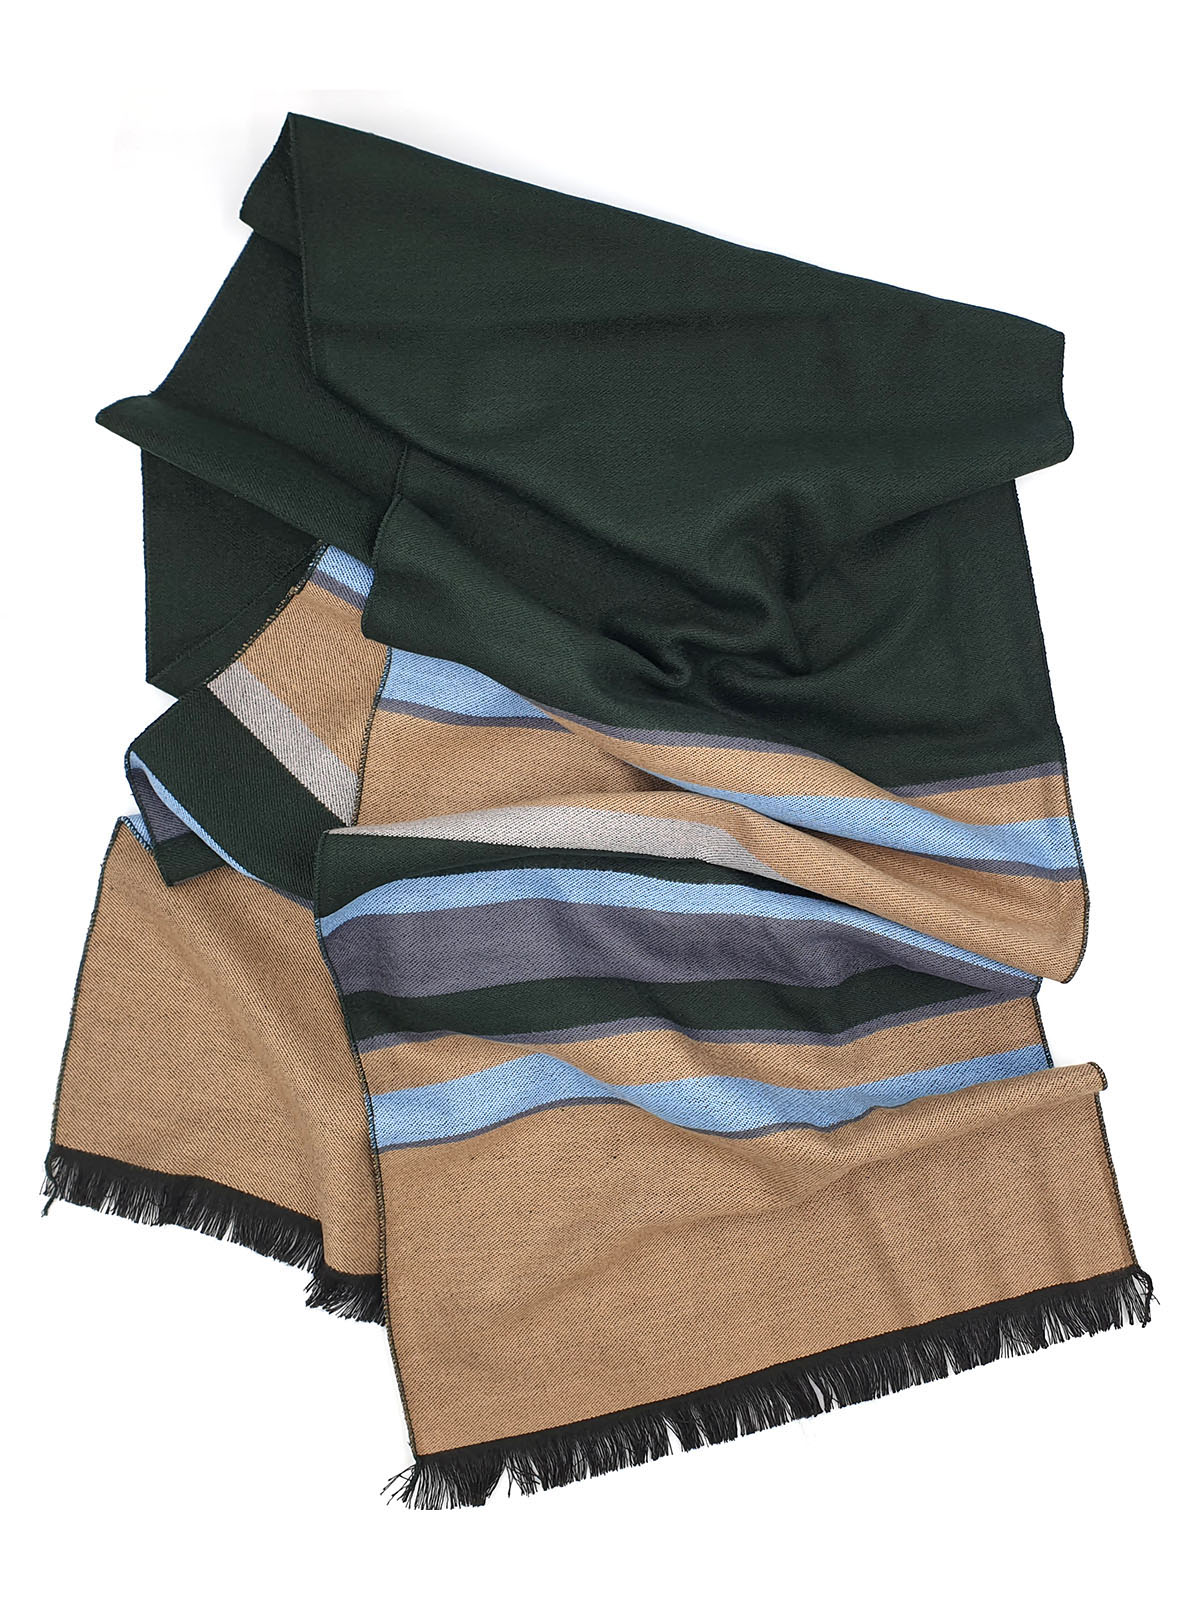 Scarf in black with a colorful stripe - 10350 - € 19.68 img2